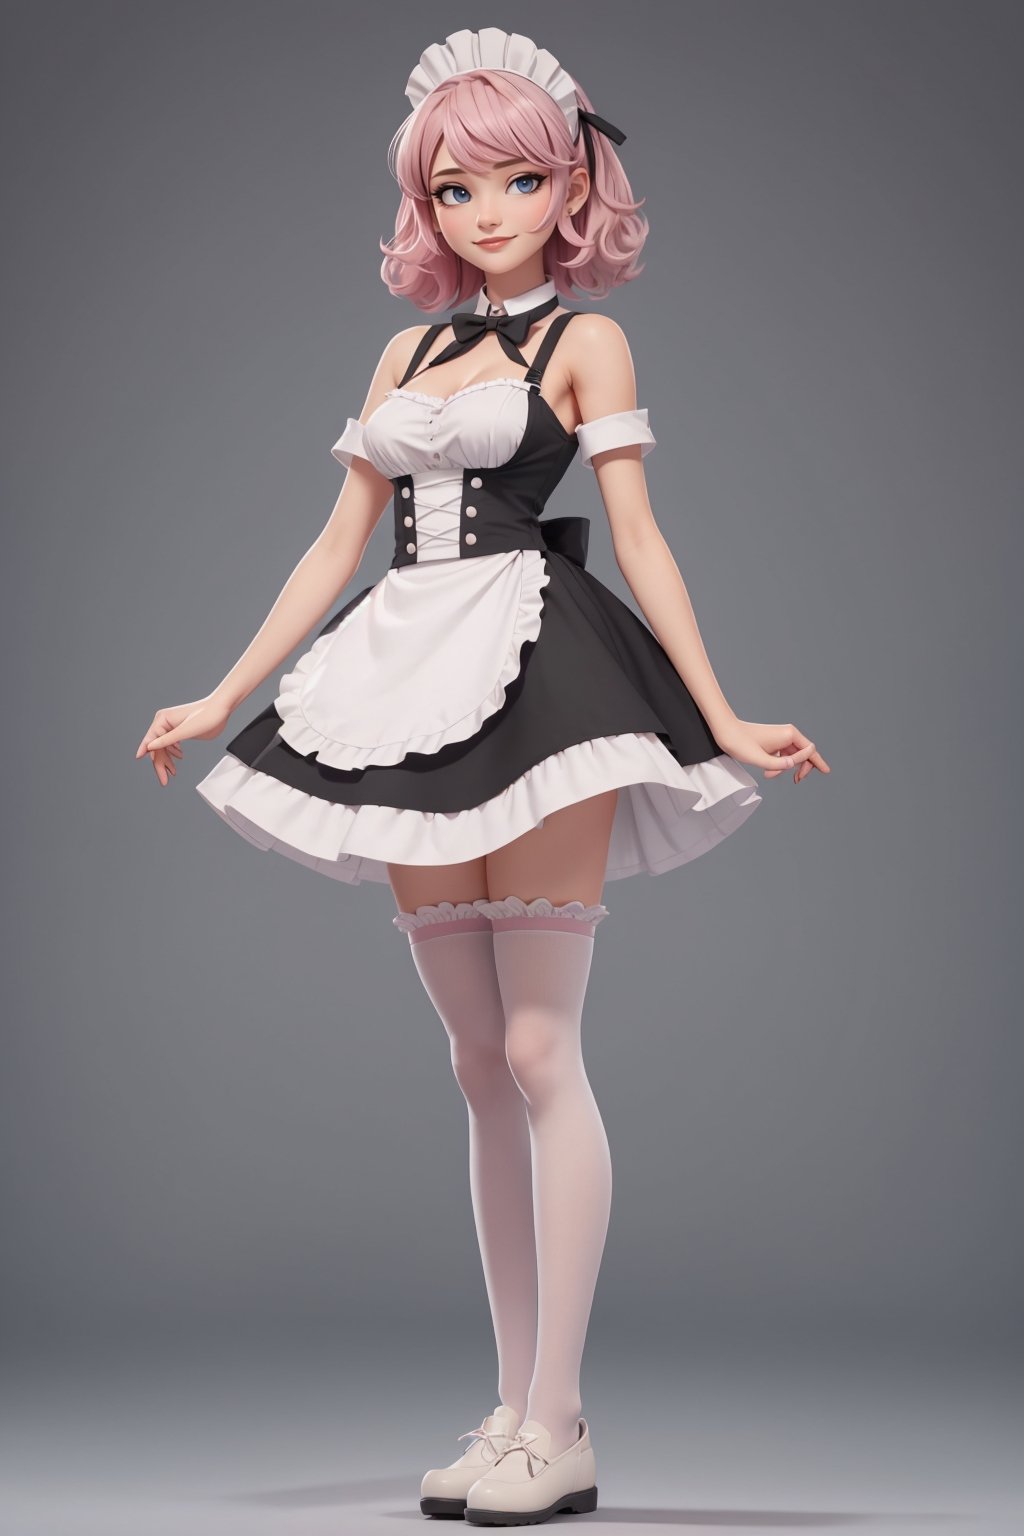 character sheet, beautiful, good hands, full body, good body, 18 year old girl body, sexy pose, full_body,character_sheet, shoulder length fluffy semi wavy hair, pink hair, maid clothes, white stockings, maid black shoes,barefoot